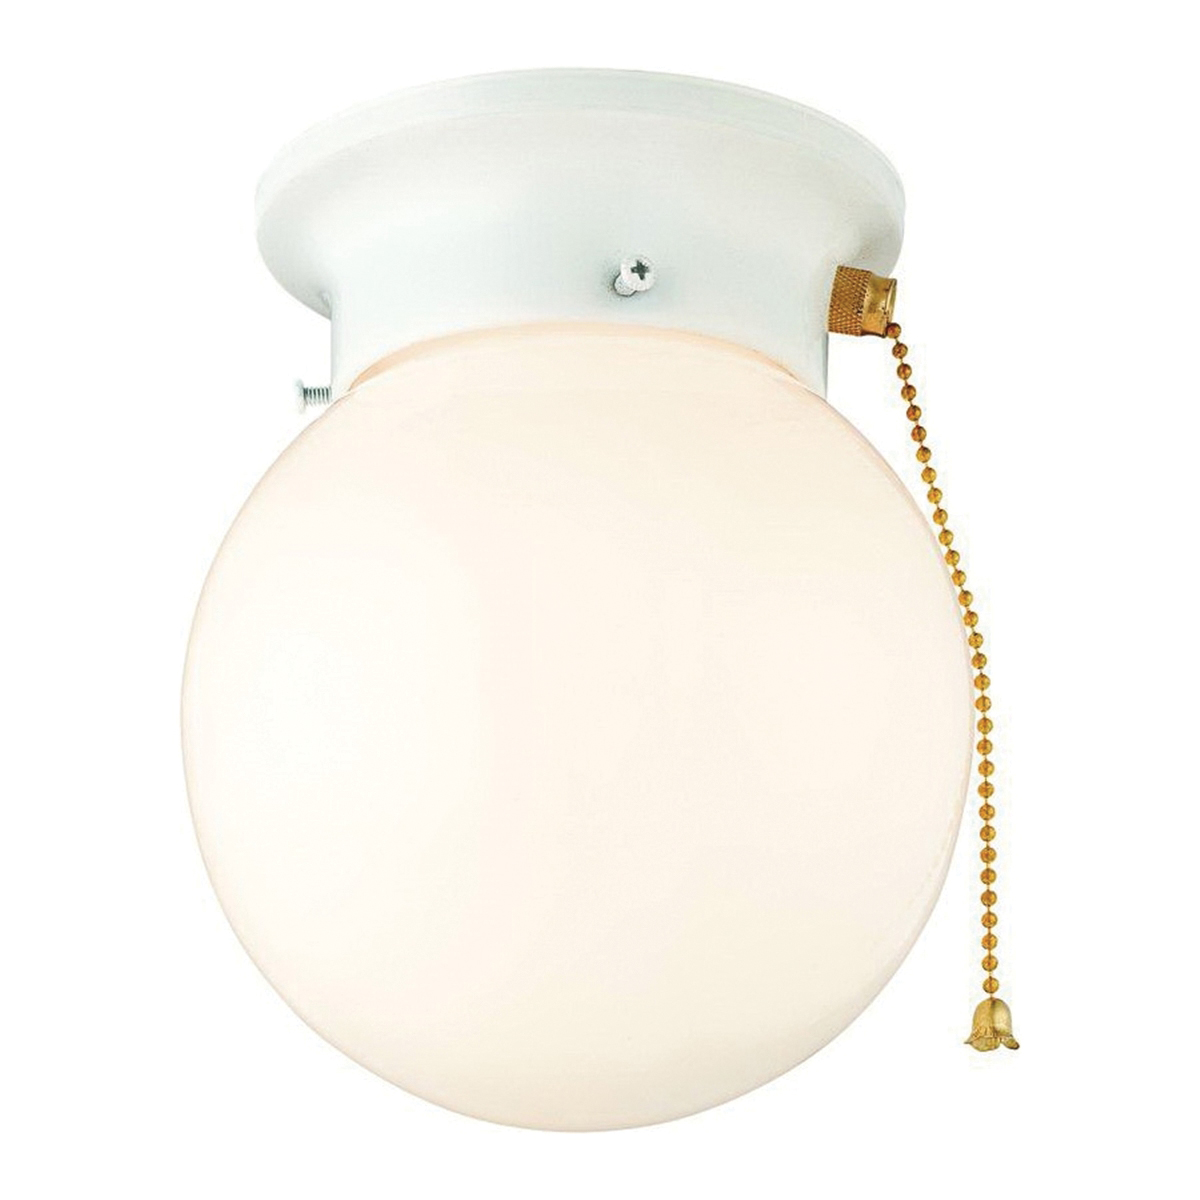 54-4908 Ceiling Light Fixture with Pull Chain, 60 W, 1-Lamp, White Fixture